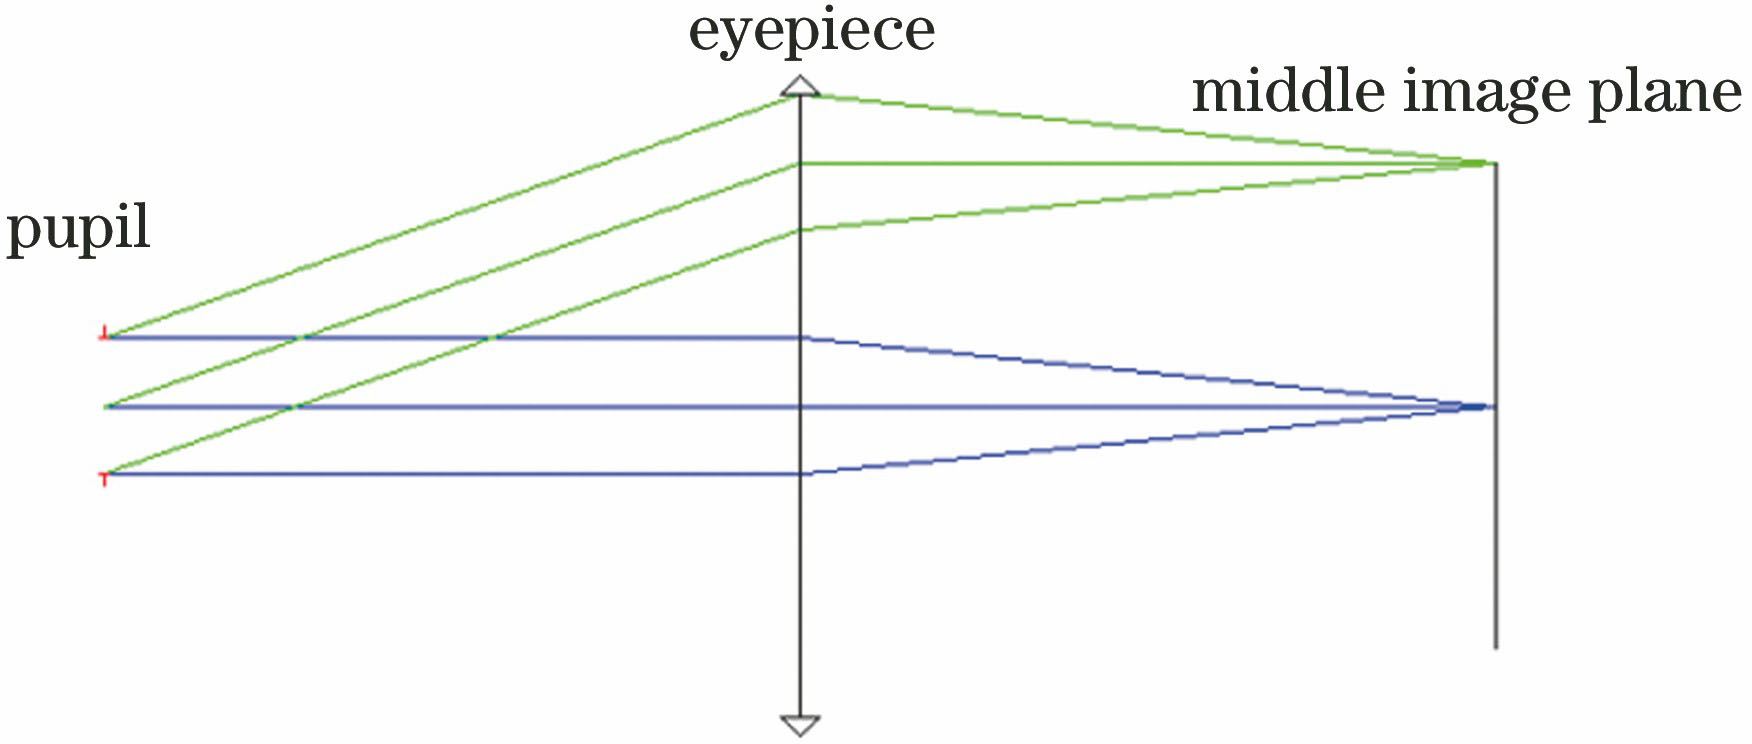 Imaging relationship of middle image surface observed by human eyes